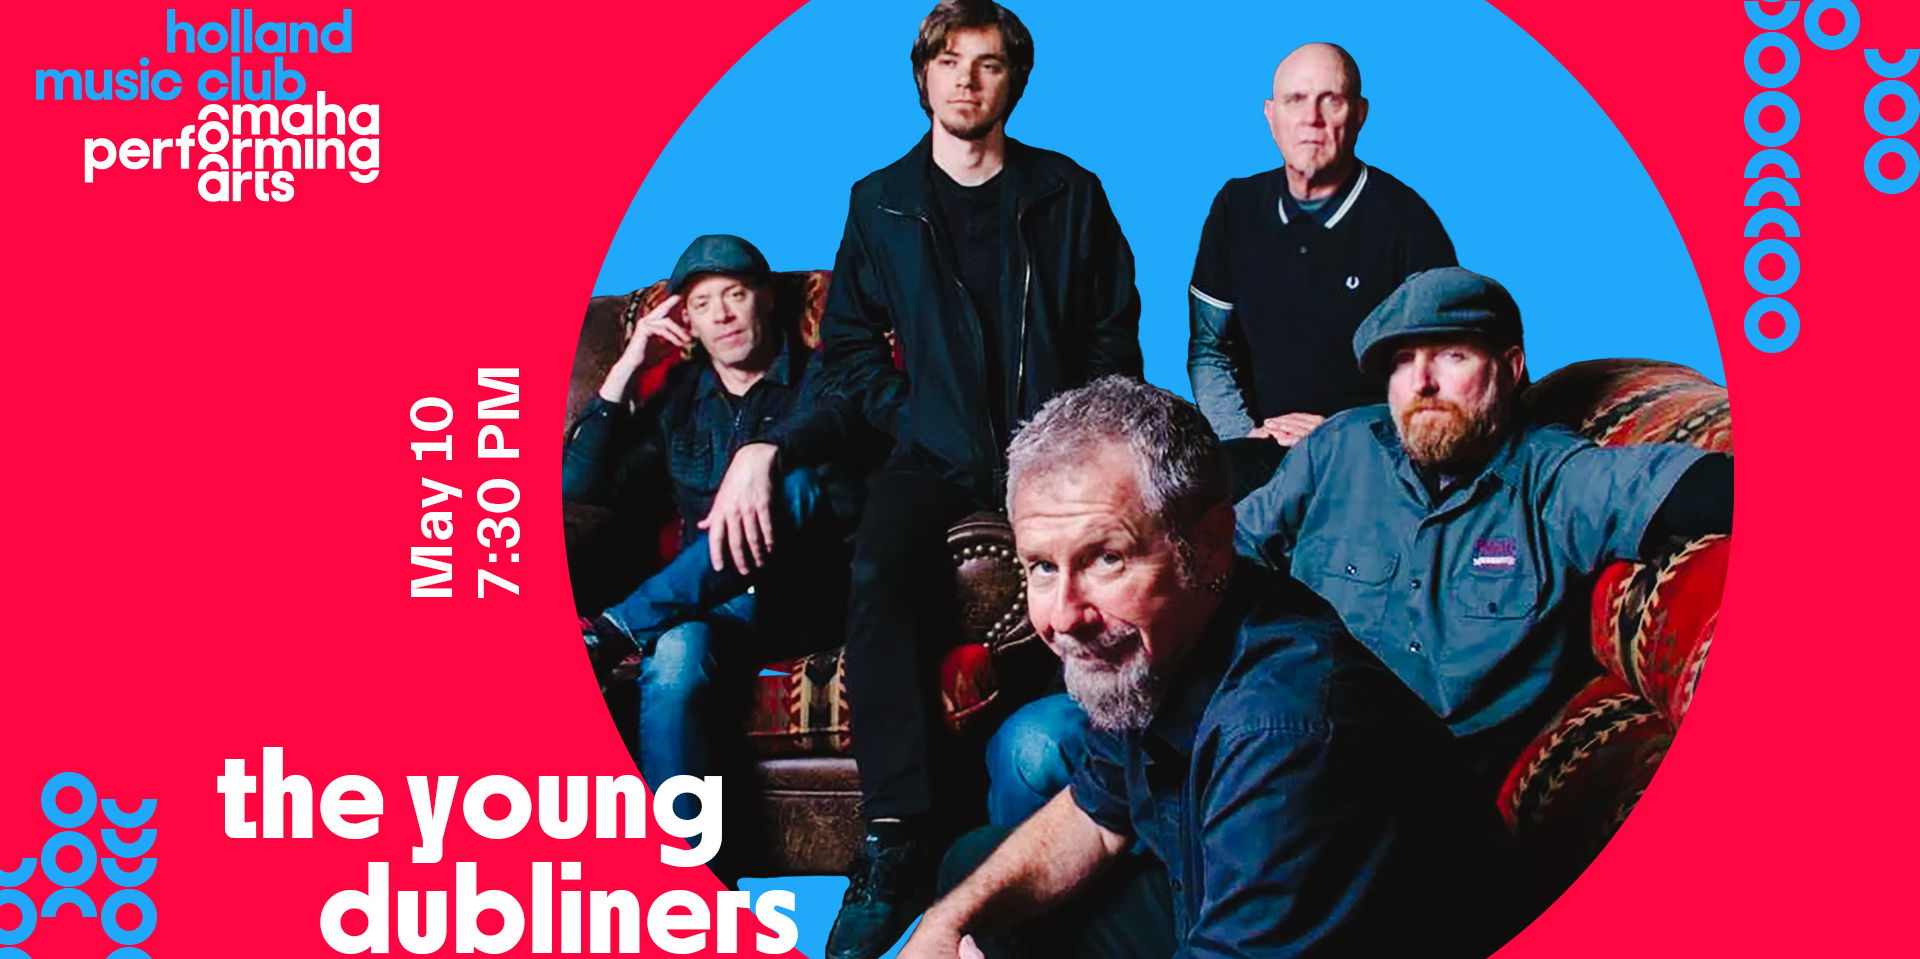 The Young Dubliners promotional image